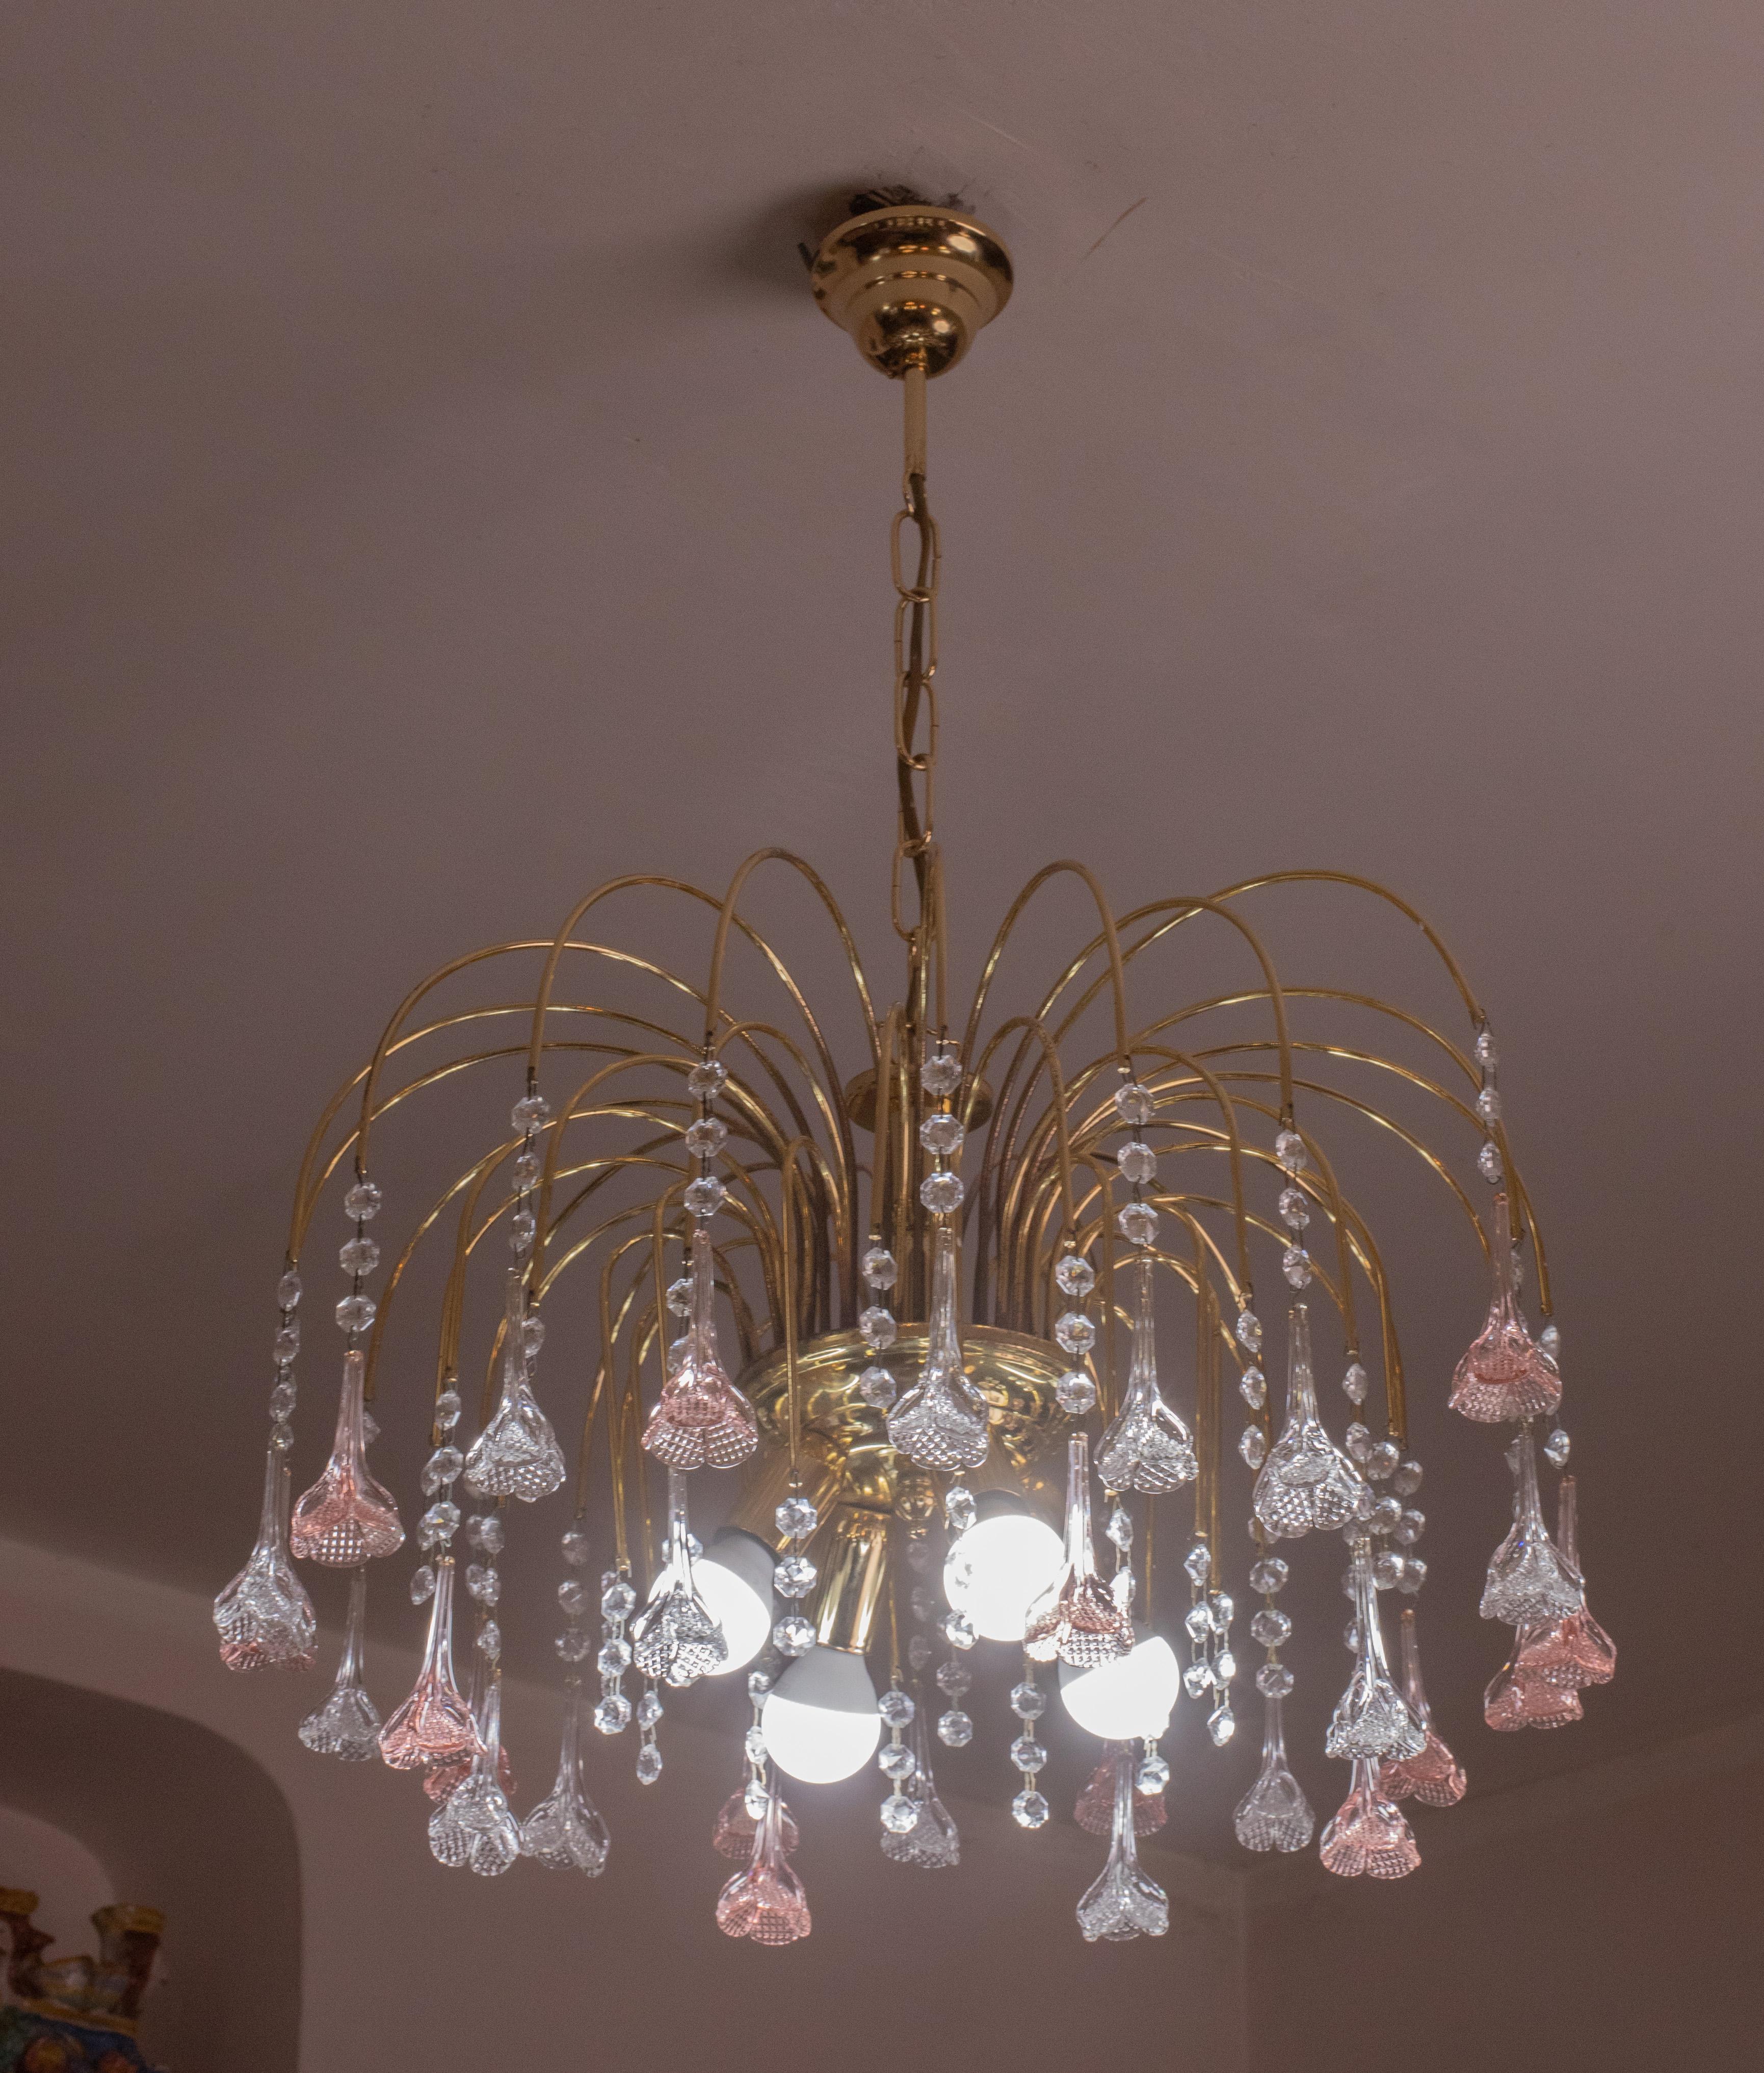 Pretty Murano chandelier with pink and transparent flowers in the style of Venini La Cascata.

circa 1970s period.

The chandelier consists of three rounds of pendants cascading down, the innermost round consists of only crystals (3 per hook),